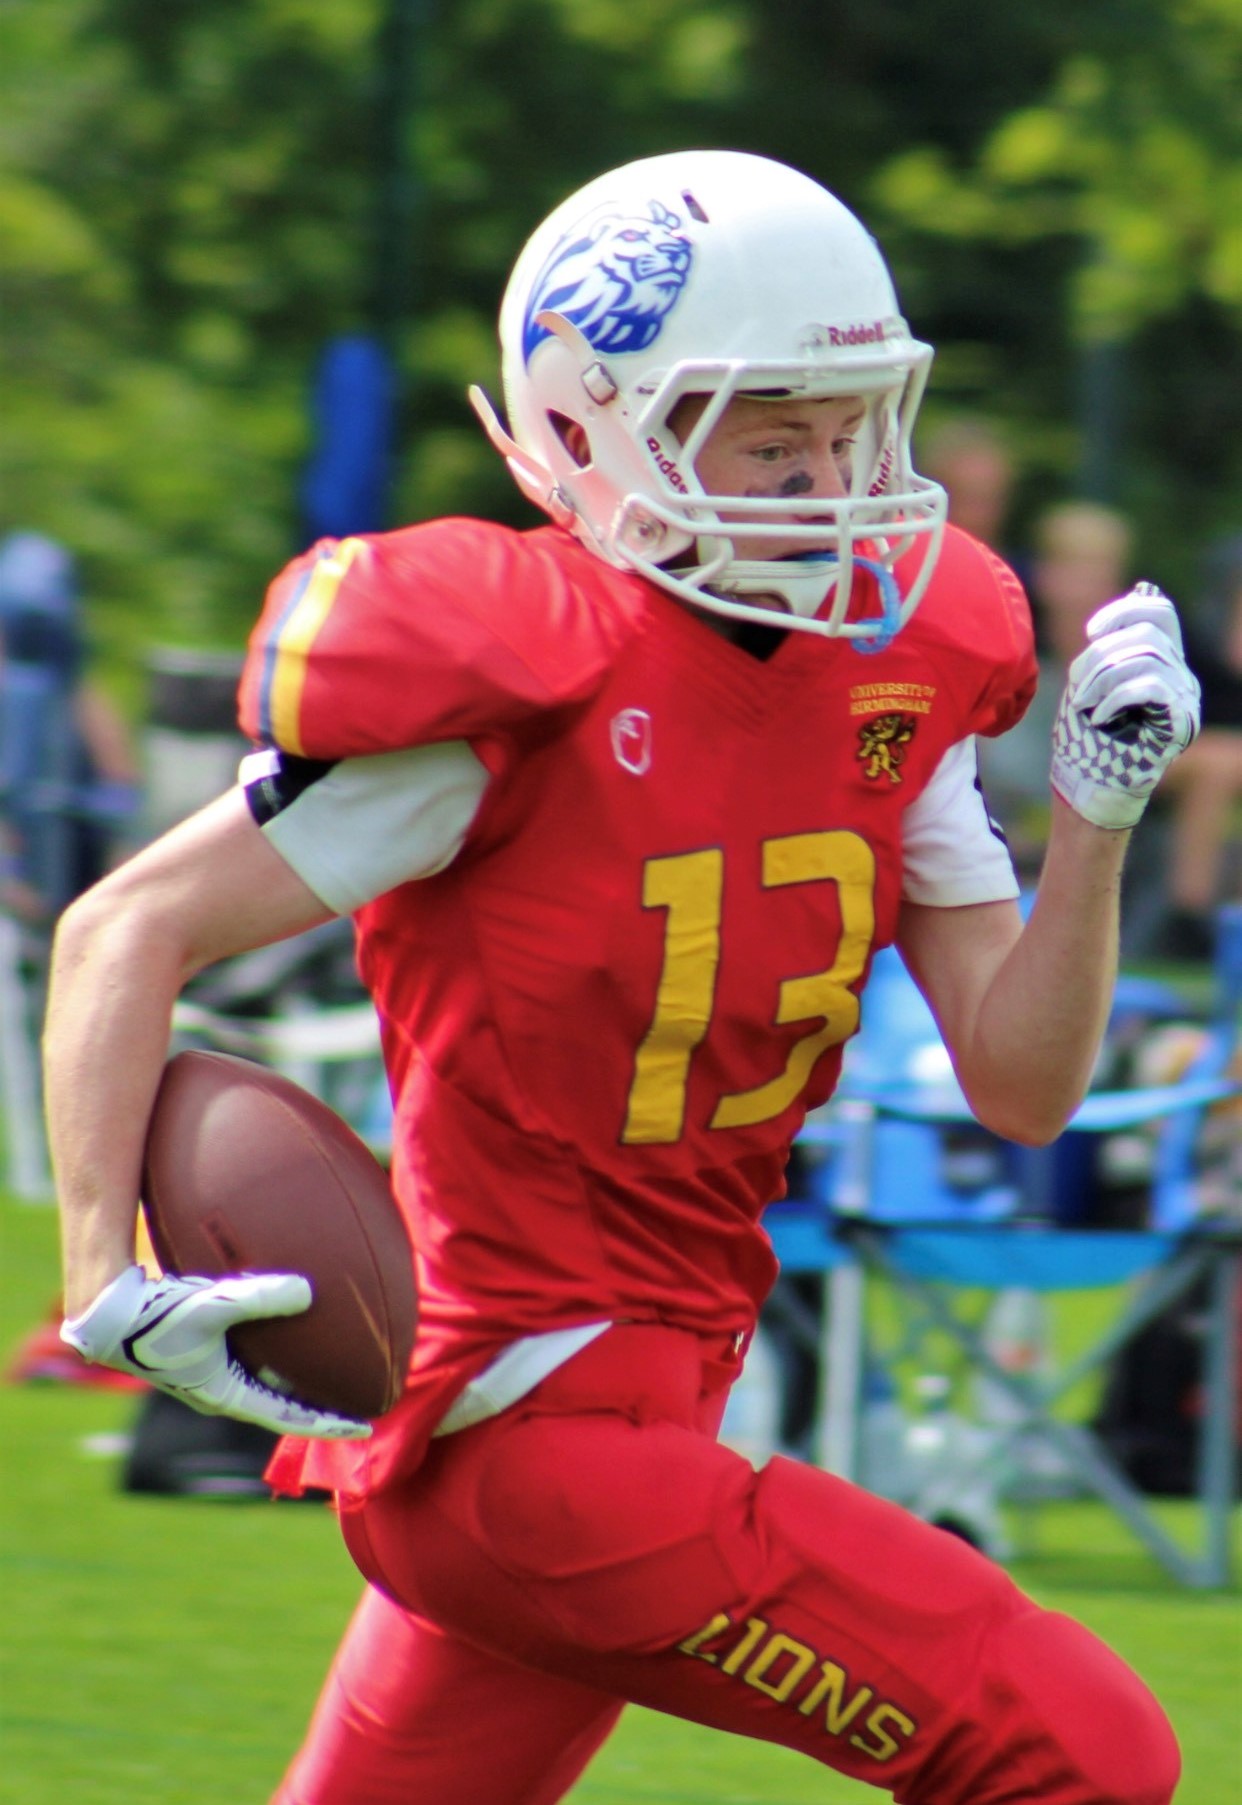 Male American football player running in red uniform whilst holding the ball